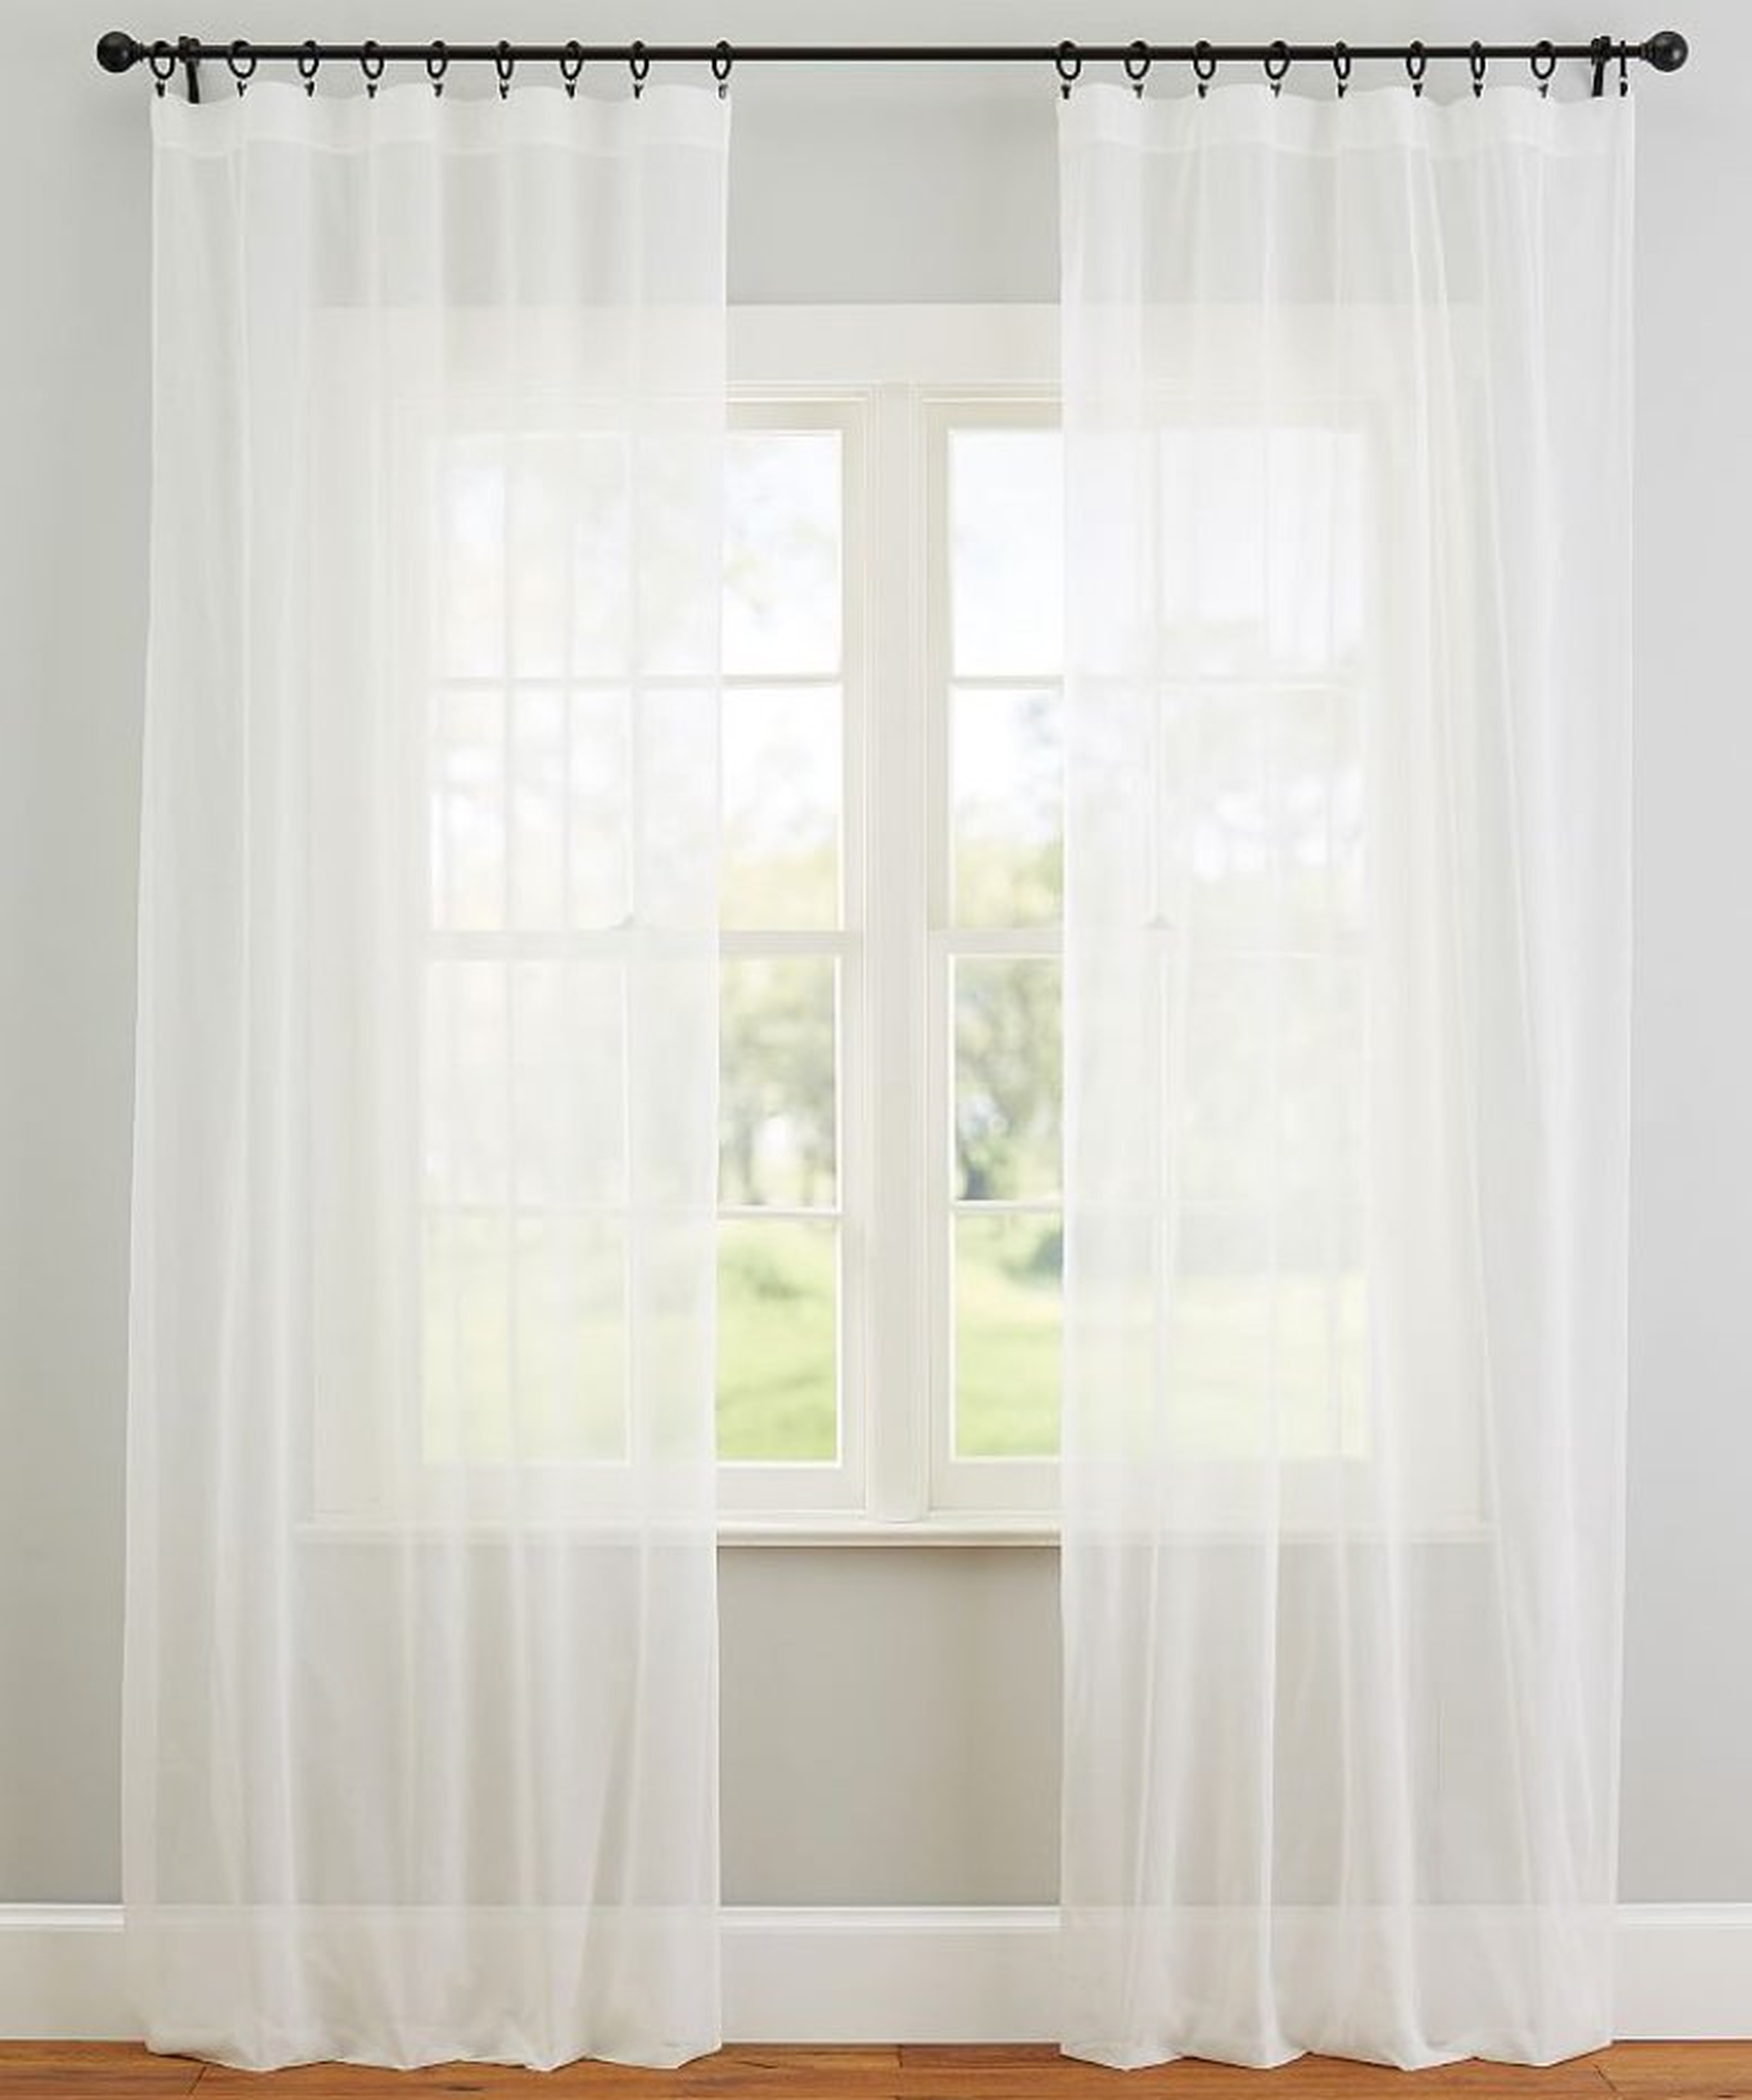 Classic Voile Sheer Curtain, Set of 2, 96", White - Pottery Barn